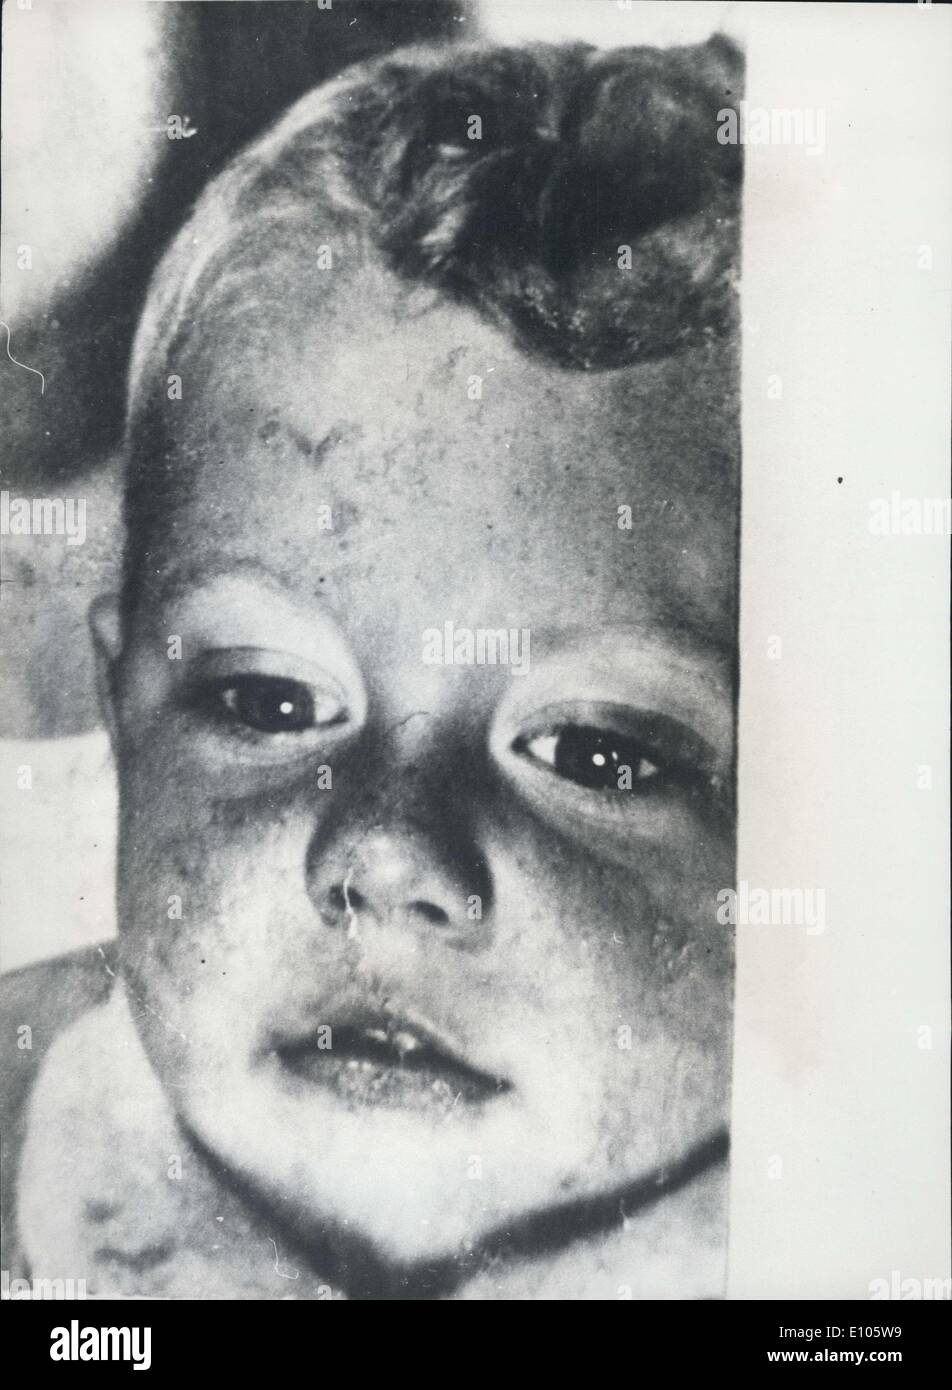 The Mary Bell Murder Case Jan. 01, 1970 - Pictured: 4 year old Martin Brown, who is one of the two children who were killed by 11 year old Mary Bell - (exact date unknown) - Mary Bell became notorious at 11 after being convicted of strangling two small boys. Mary Bell was sentenced to ''life detention'' for the manslaughter of 4 year old Martin Brown and 3 years old Brian Howe, at Scots cod, New castle. The police launched an investigation and Mary Bell was arrested on Saturday 25th May 1968. (Credit Image: © Keystone Press Agency/Keystone USA via ZUMAPRESS.com) Stock Photo